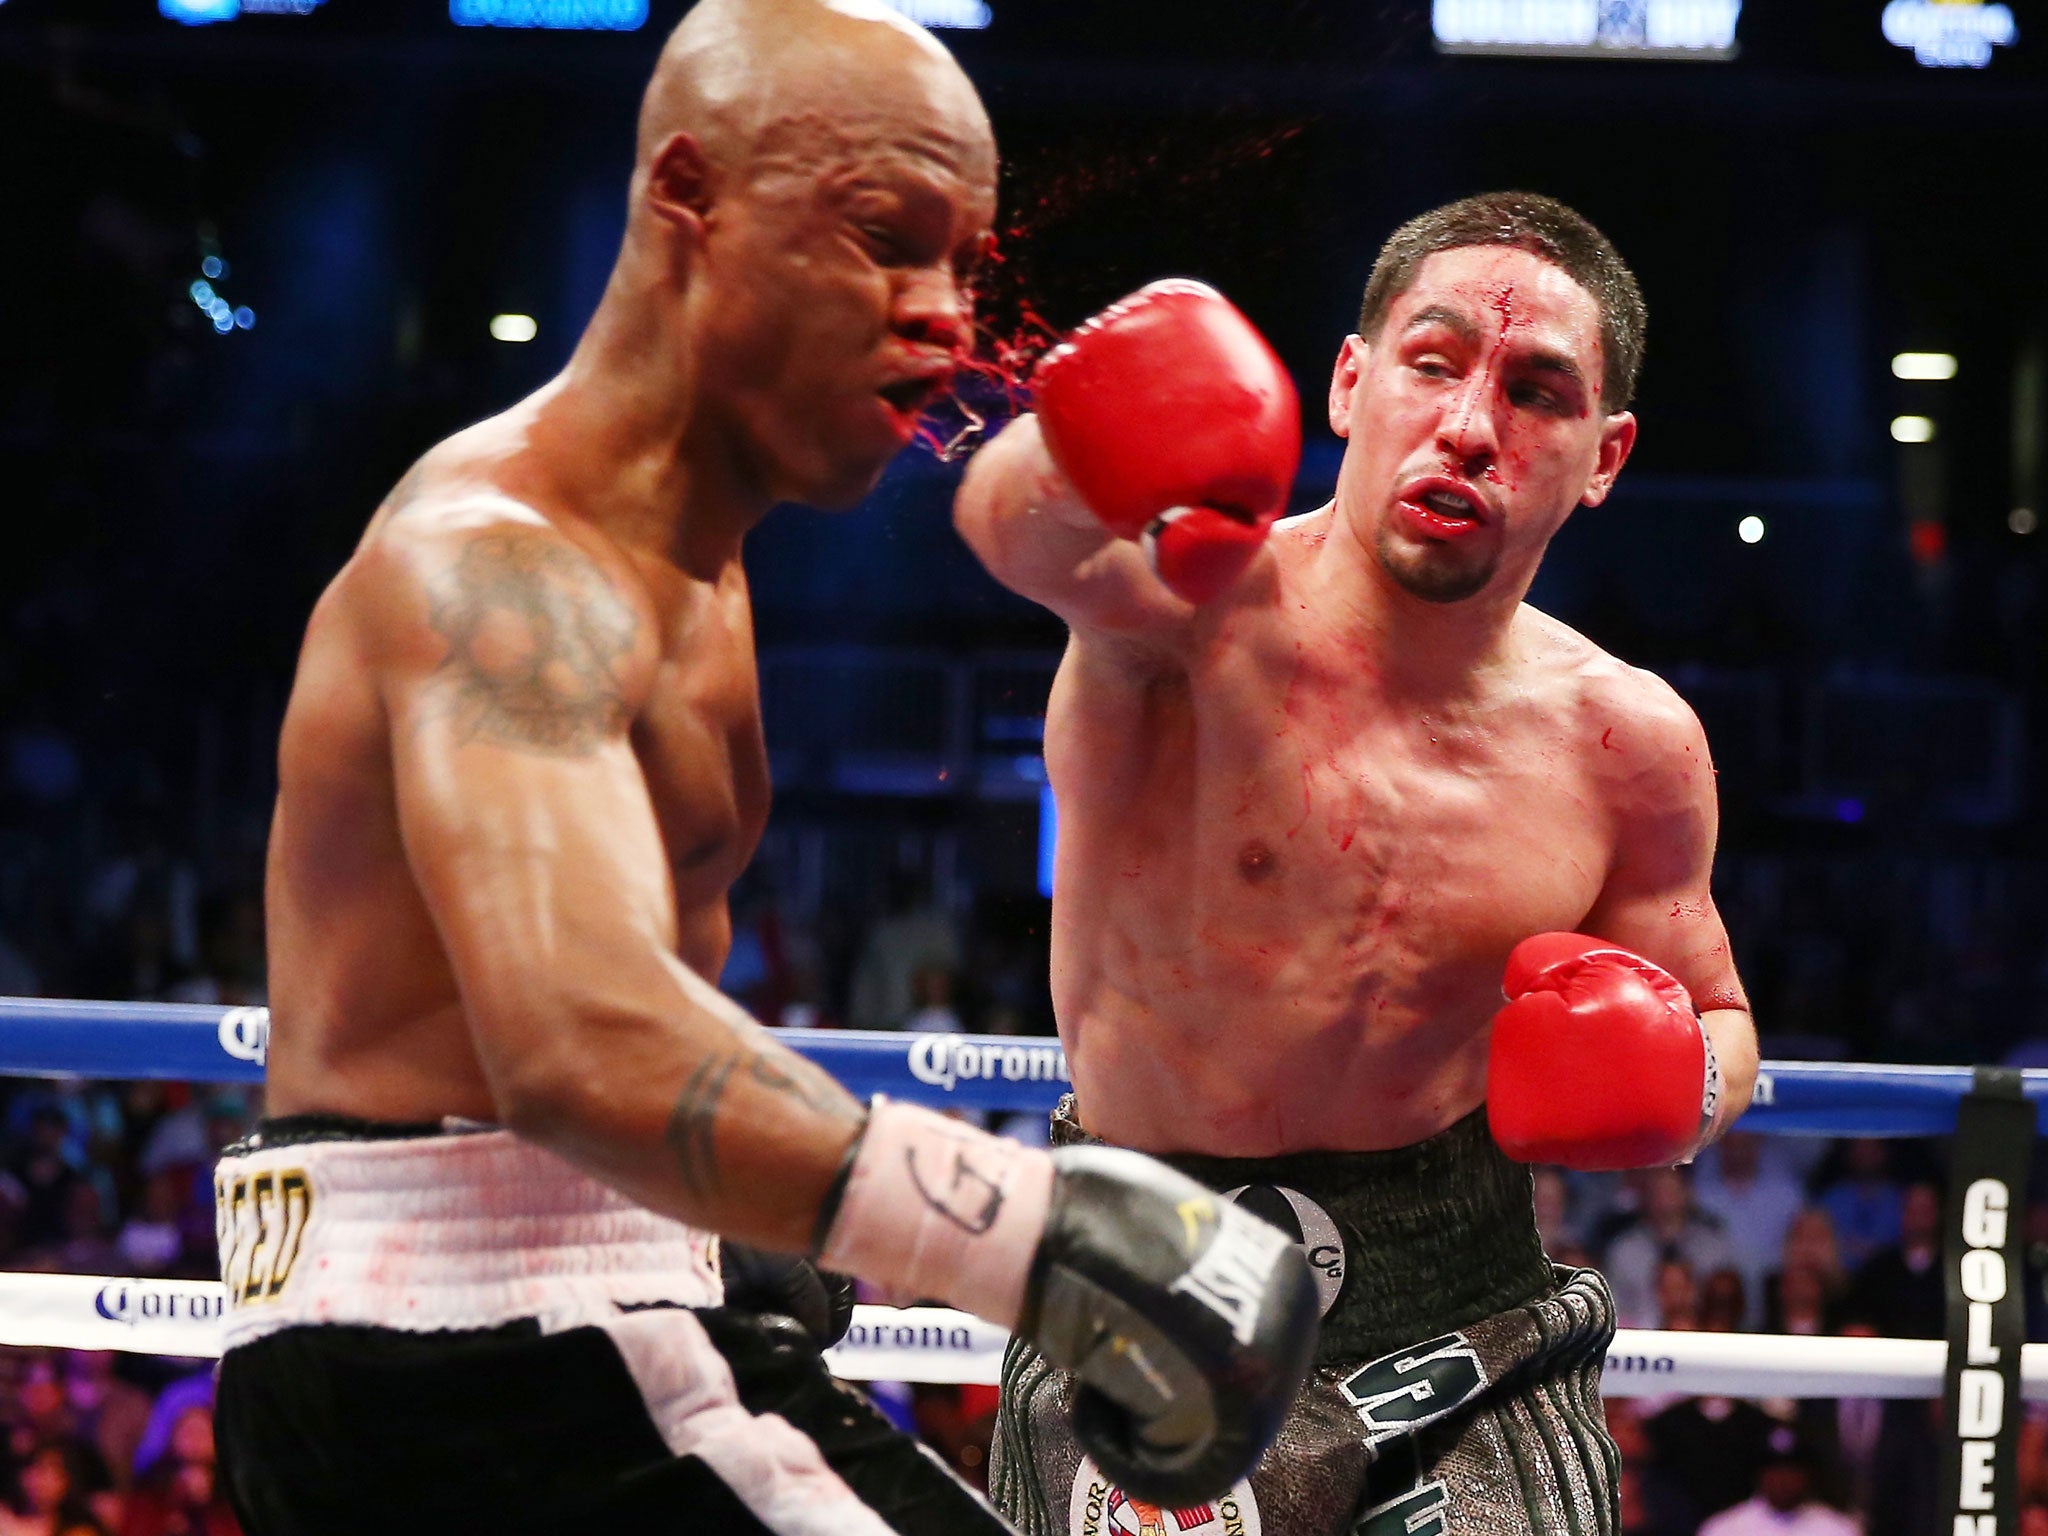 Danny Garcia, right, who could face Amir Khan in the future, lands a heavy blow on Zab Judah in their bloody light welterweight title clash